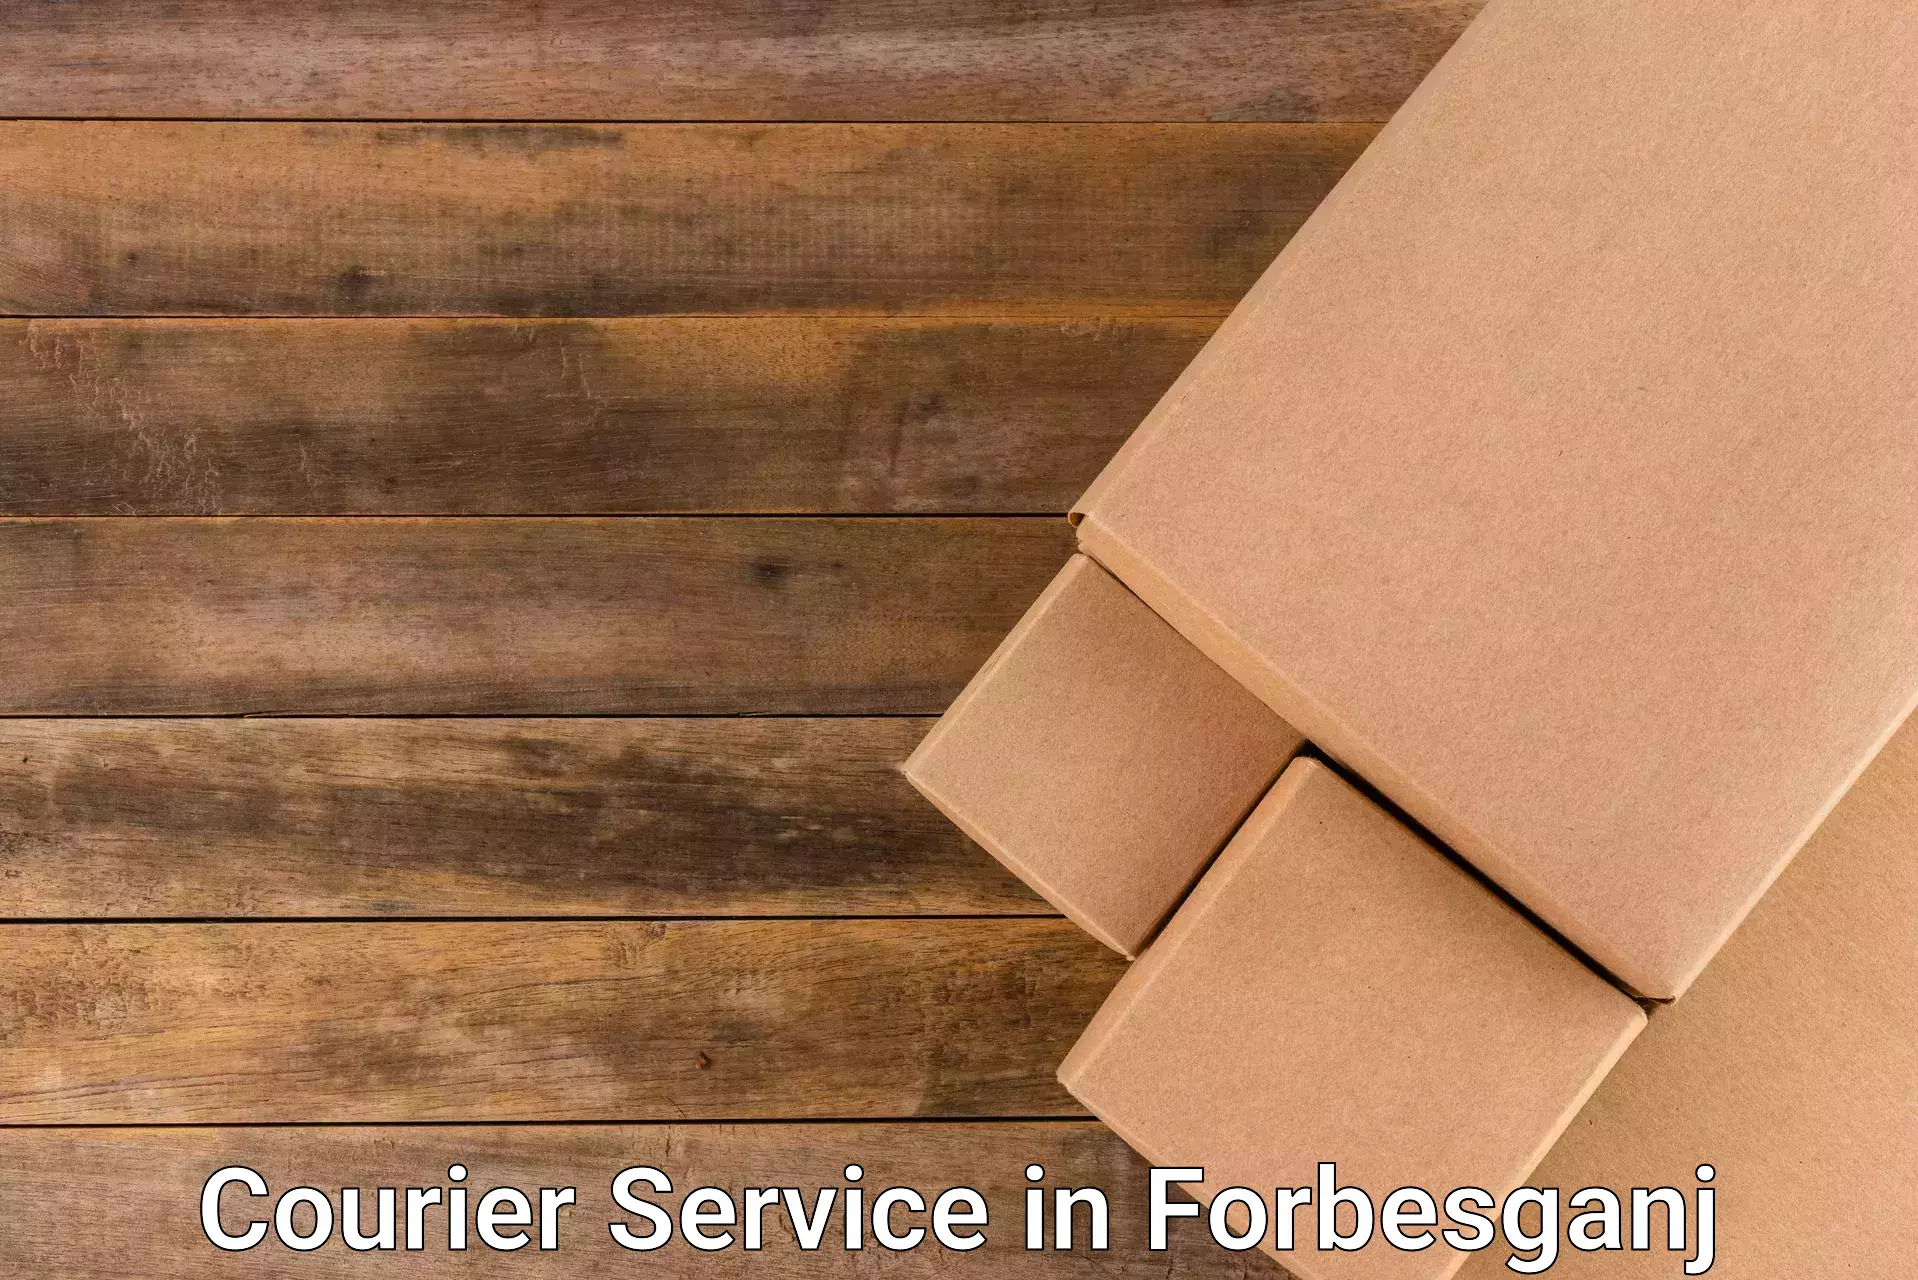 Seamless shipping experience in Forbesganj